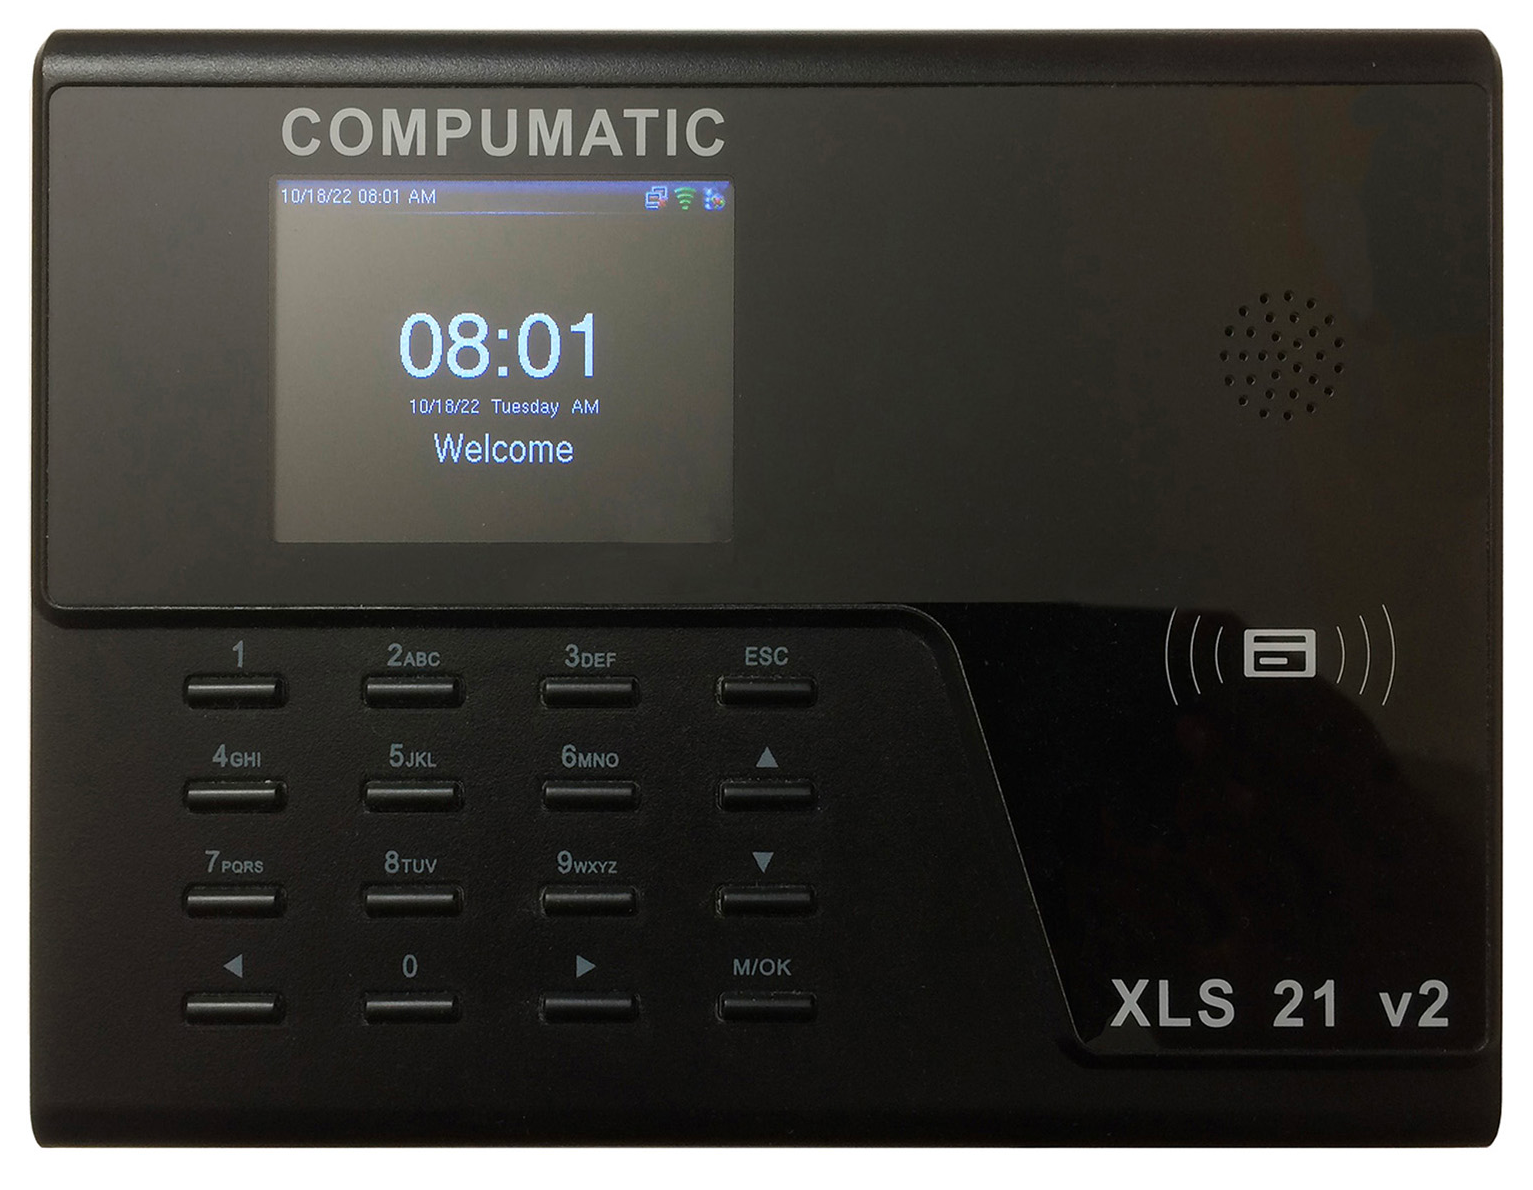 Compumatic XLS21 Time Clock System